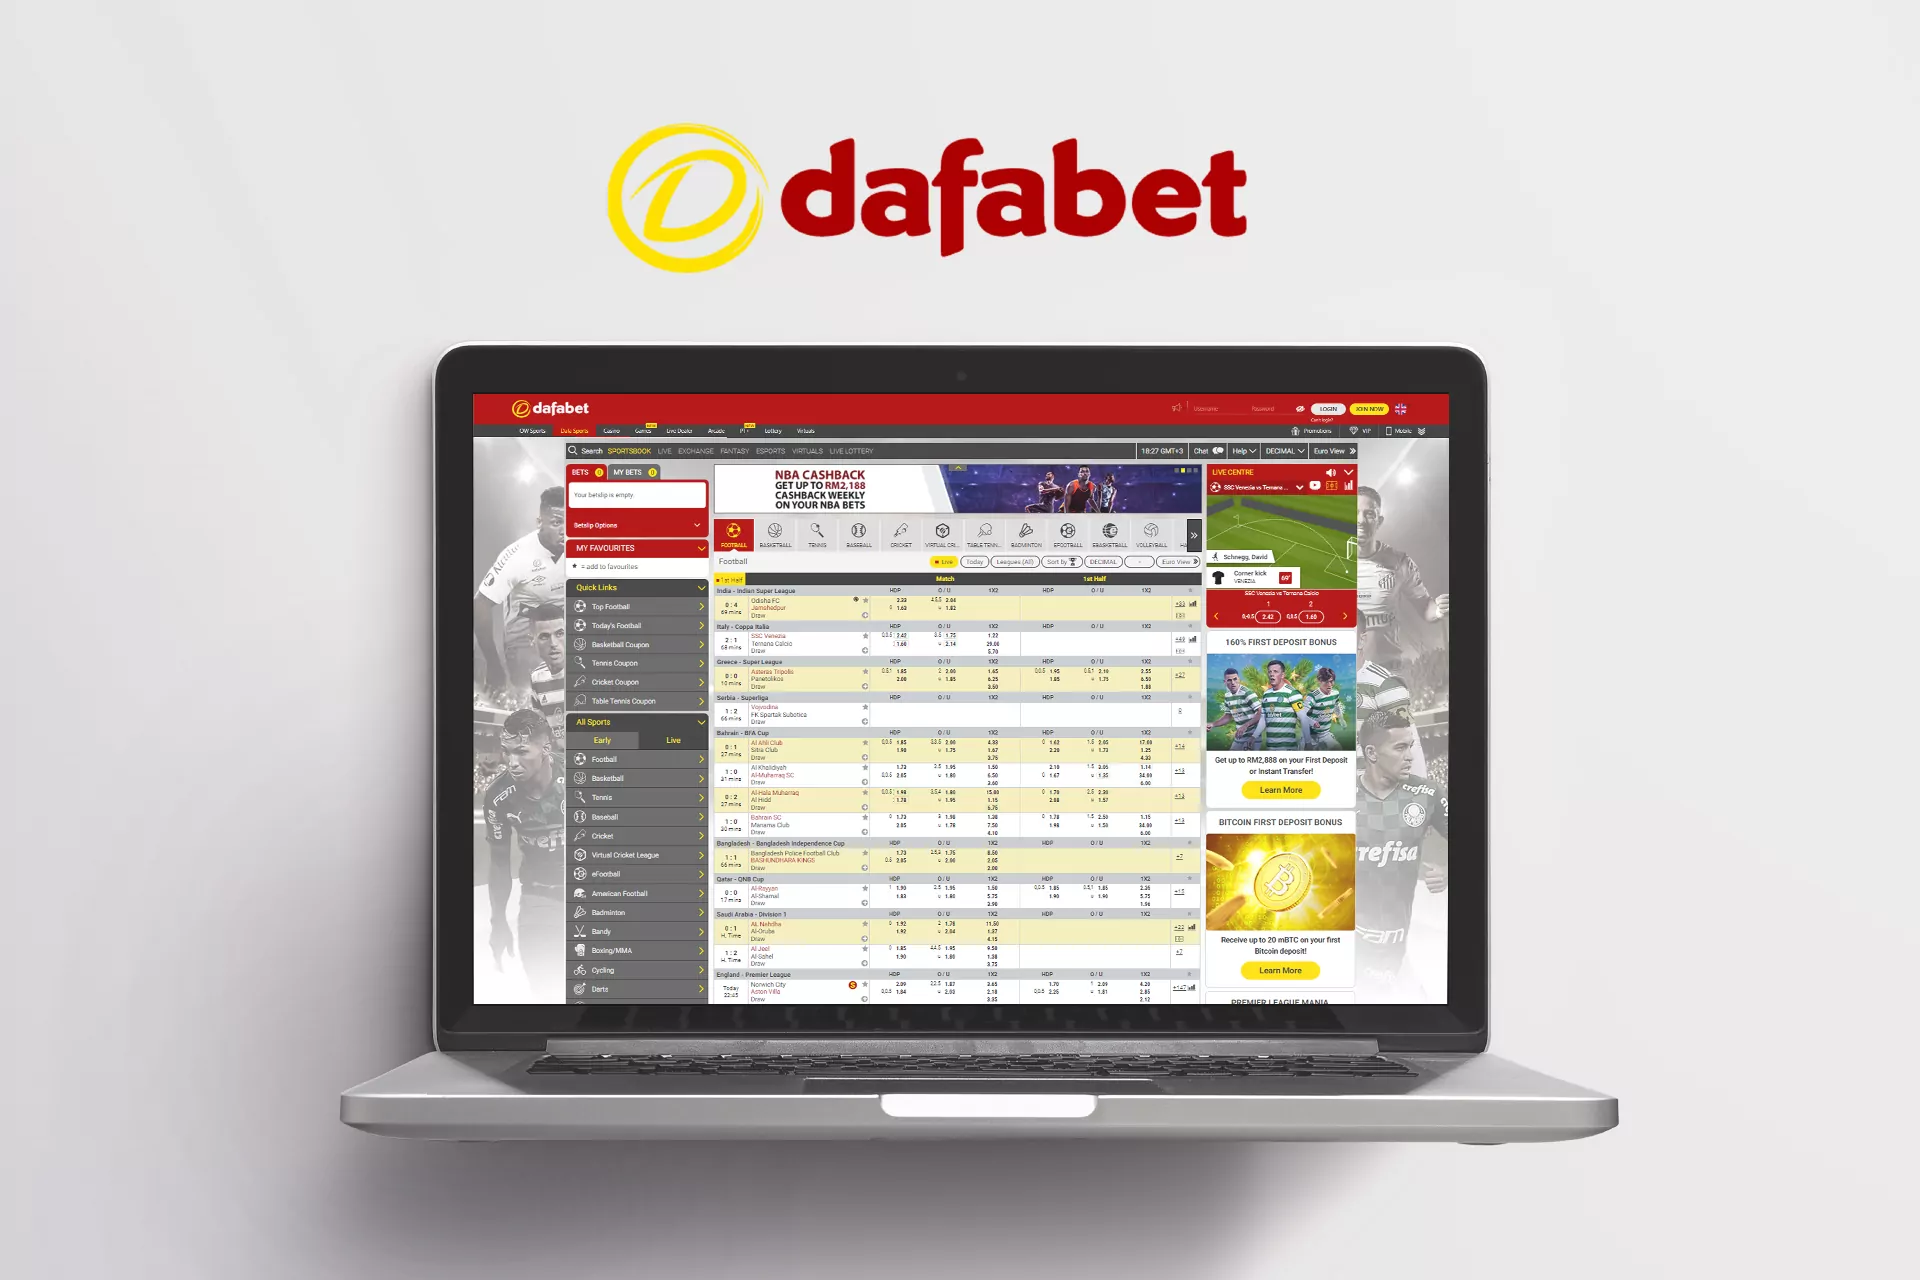 Dafabet is one of the most famous Asian bookies that works under the Curacao license.